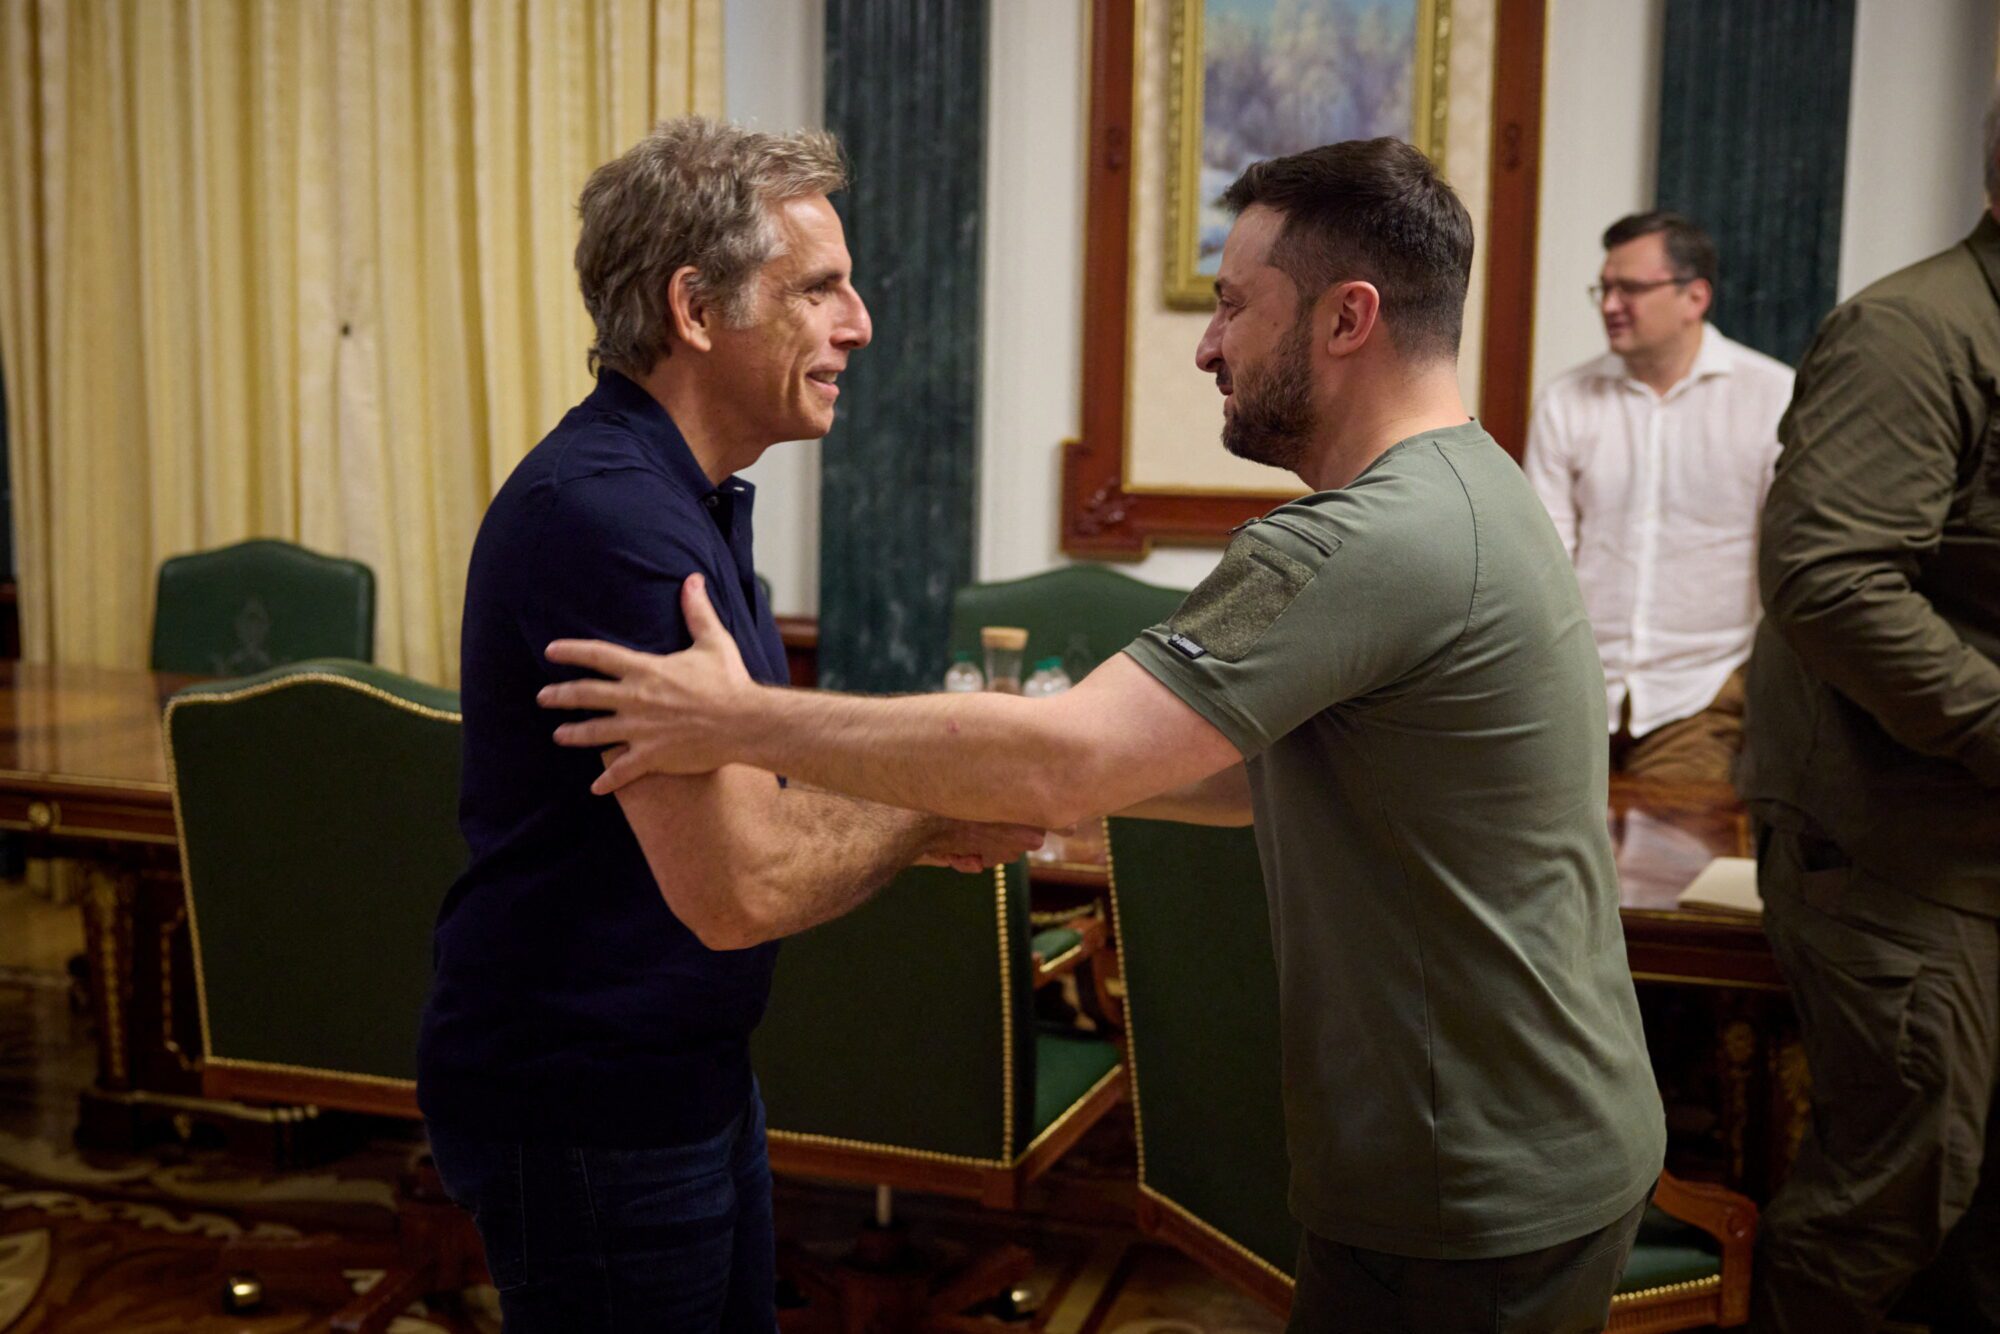 Hollywood actor and Goodwill Ambassador Ben Stiller meets with Ukraine's President Volodymyr Zelenskiy, as Russia's attack on Ukraine continues, in Kyiv, Ukraine June 20, 2022. 